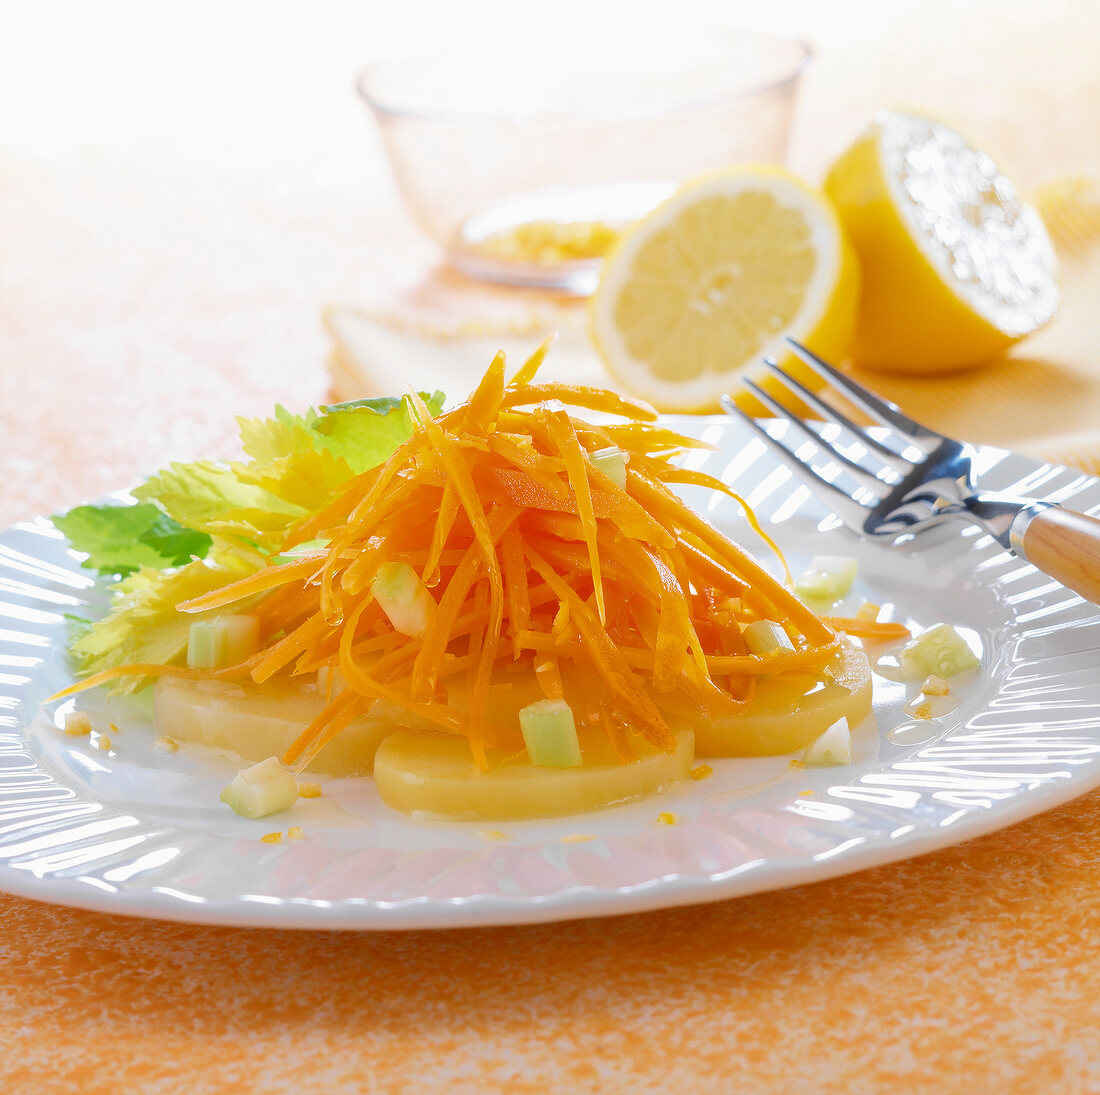 Grated carrots and potato salad with lemon juice